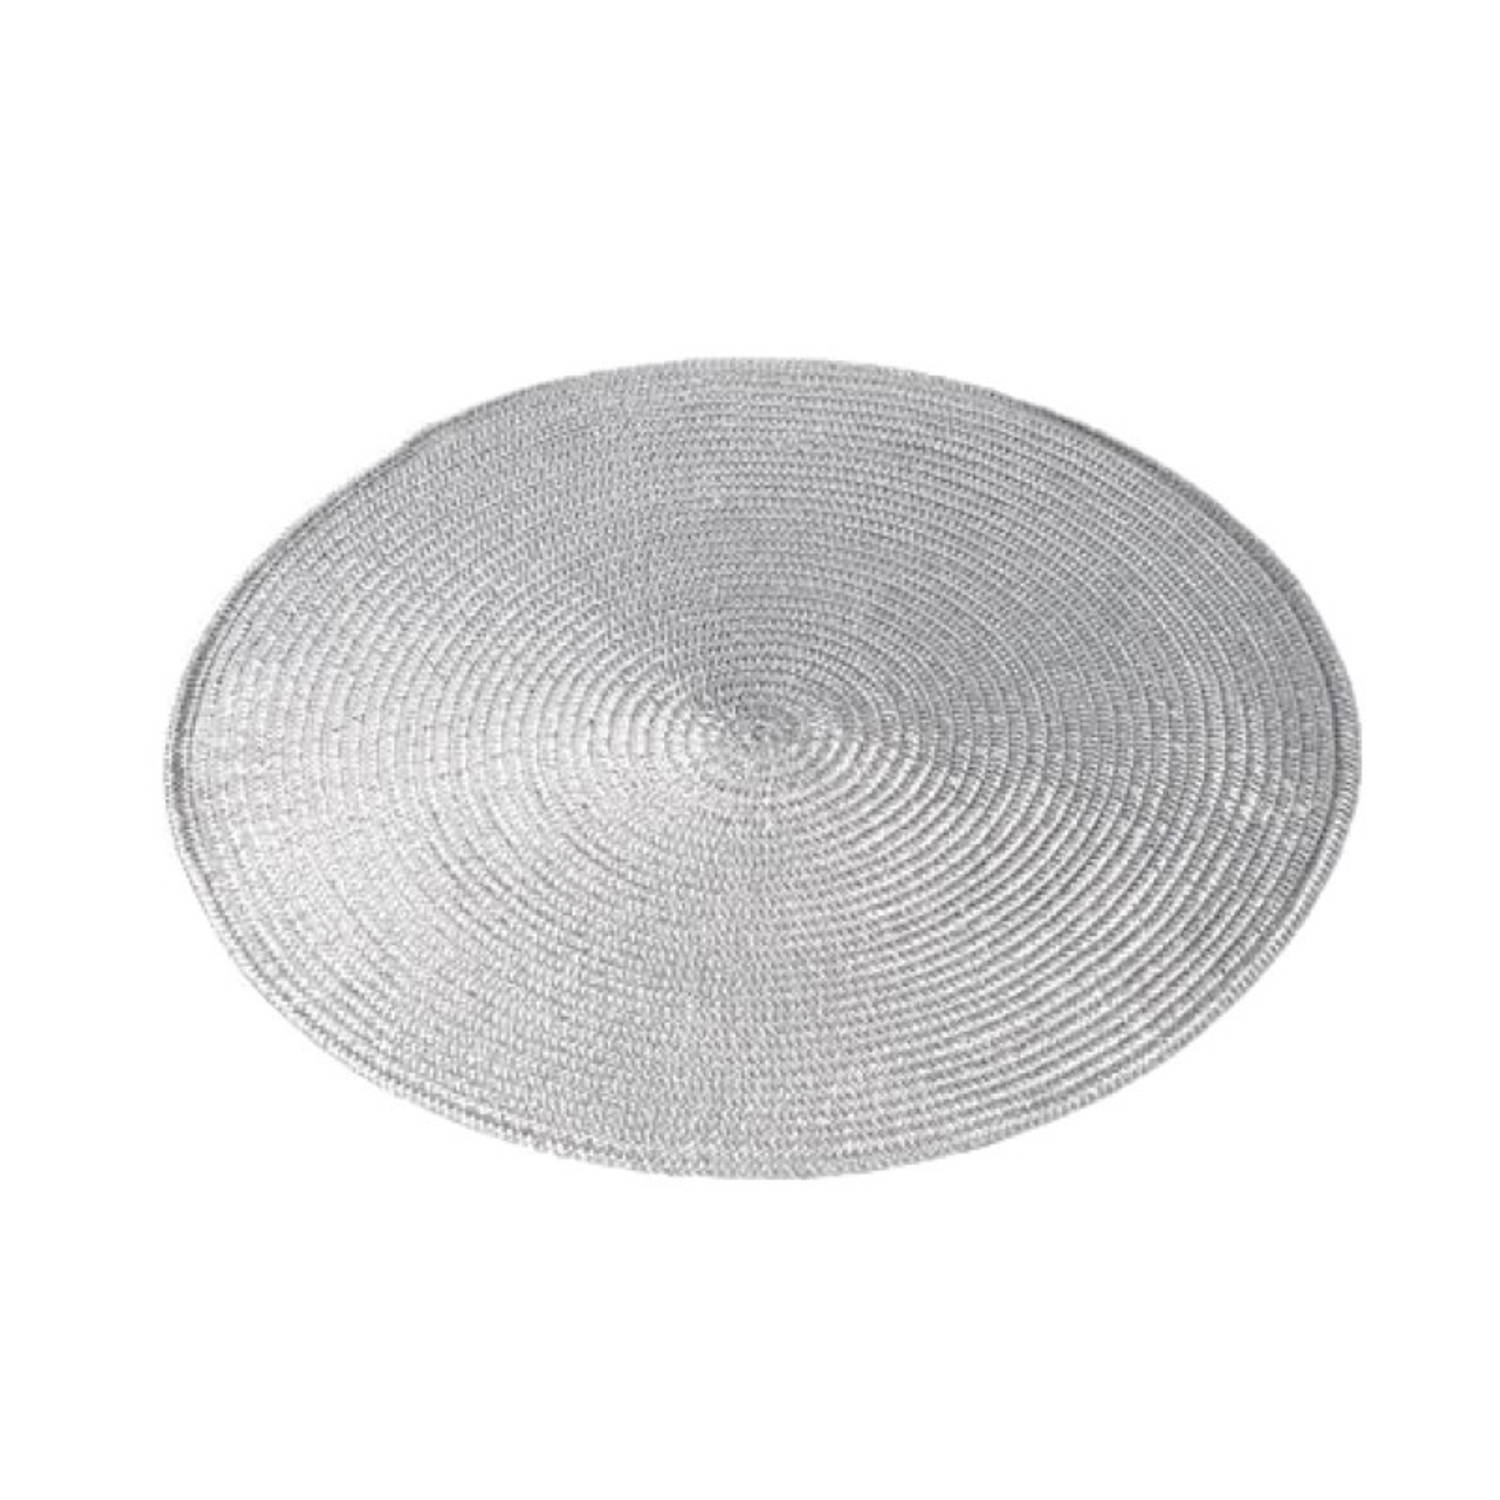 Ronde placemat zilver polypropeen 38 cm - Placemats